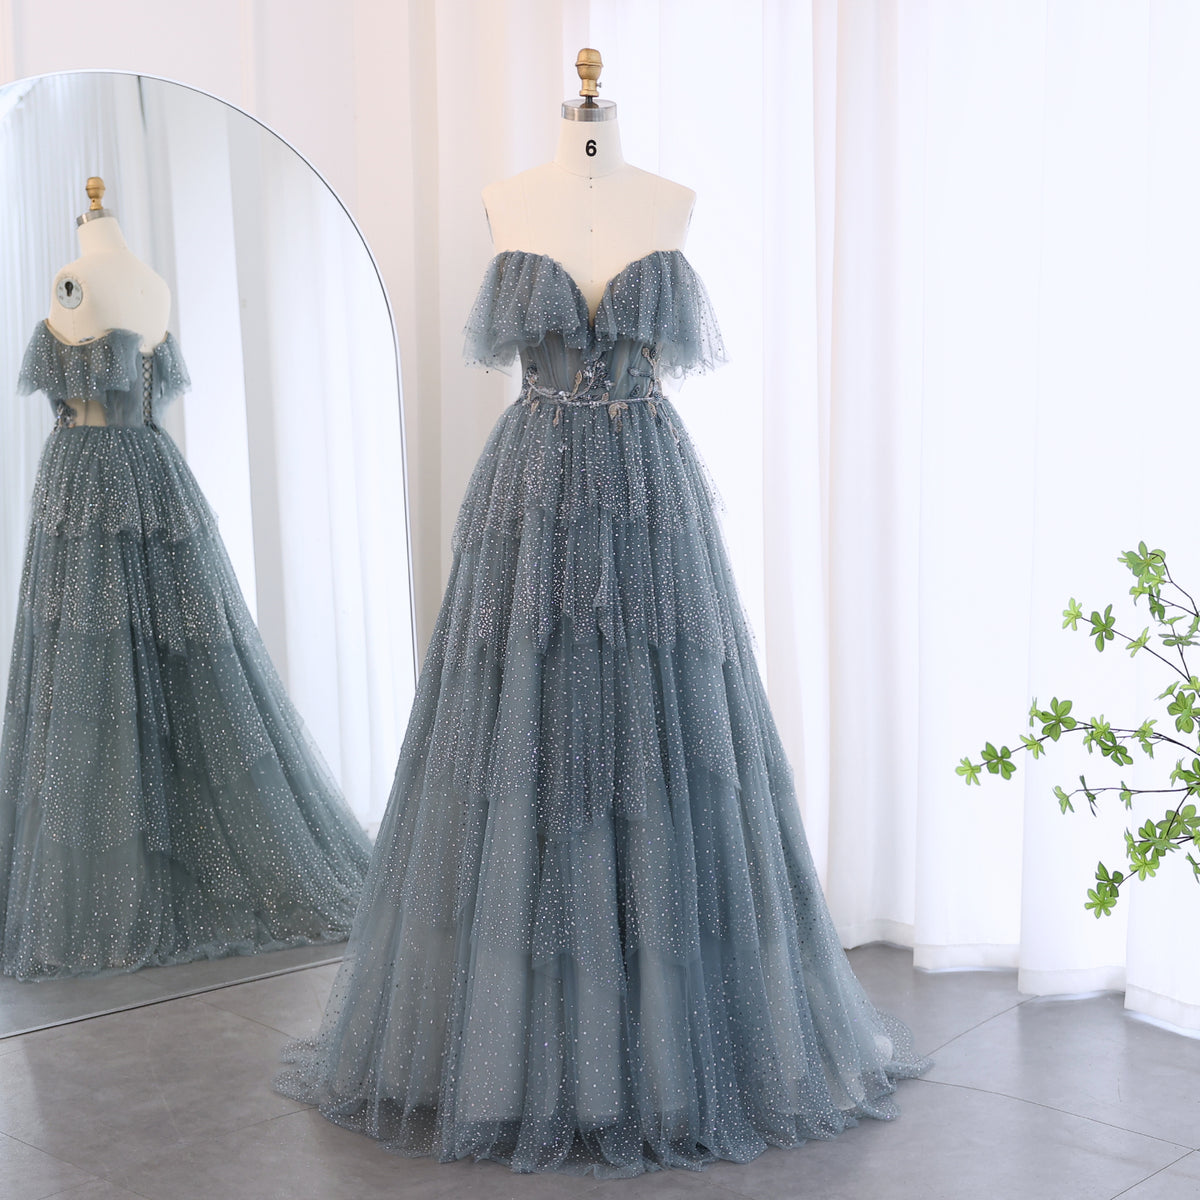 Sharon Said Sparkly Crystal Blue Sweetheart Evening Dress for Women Wedding Tiered Ruffles Luxury Dubai Bridal Party Gowns SS017